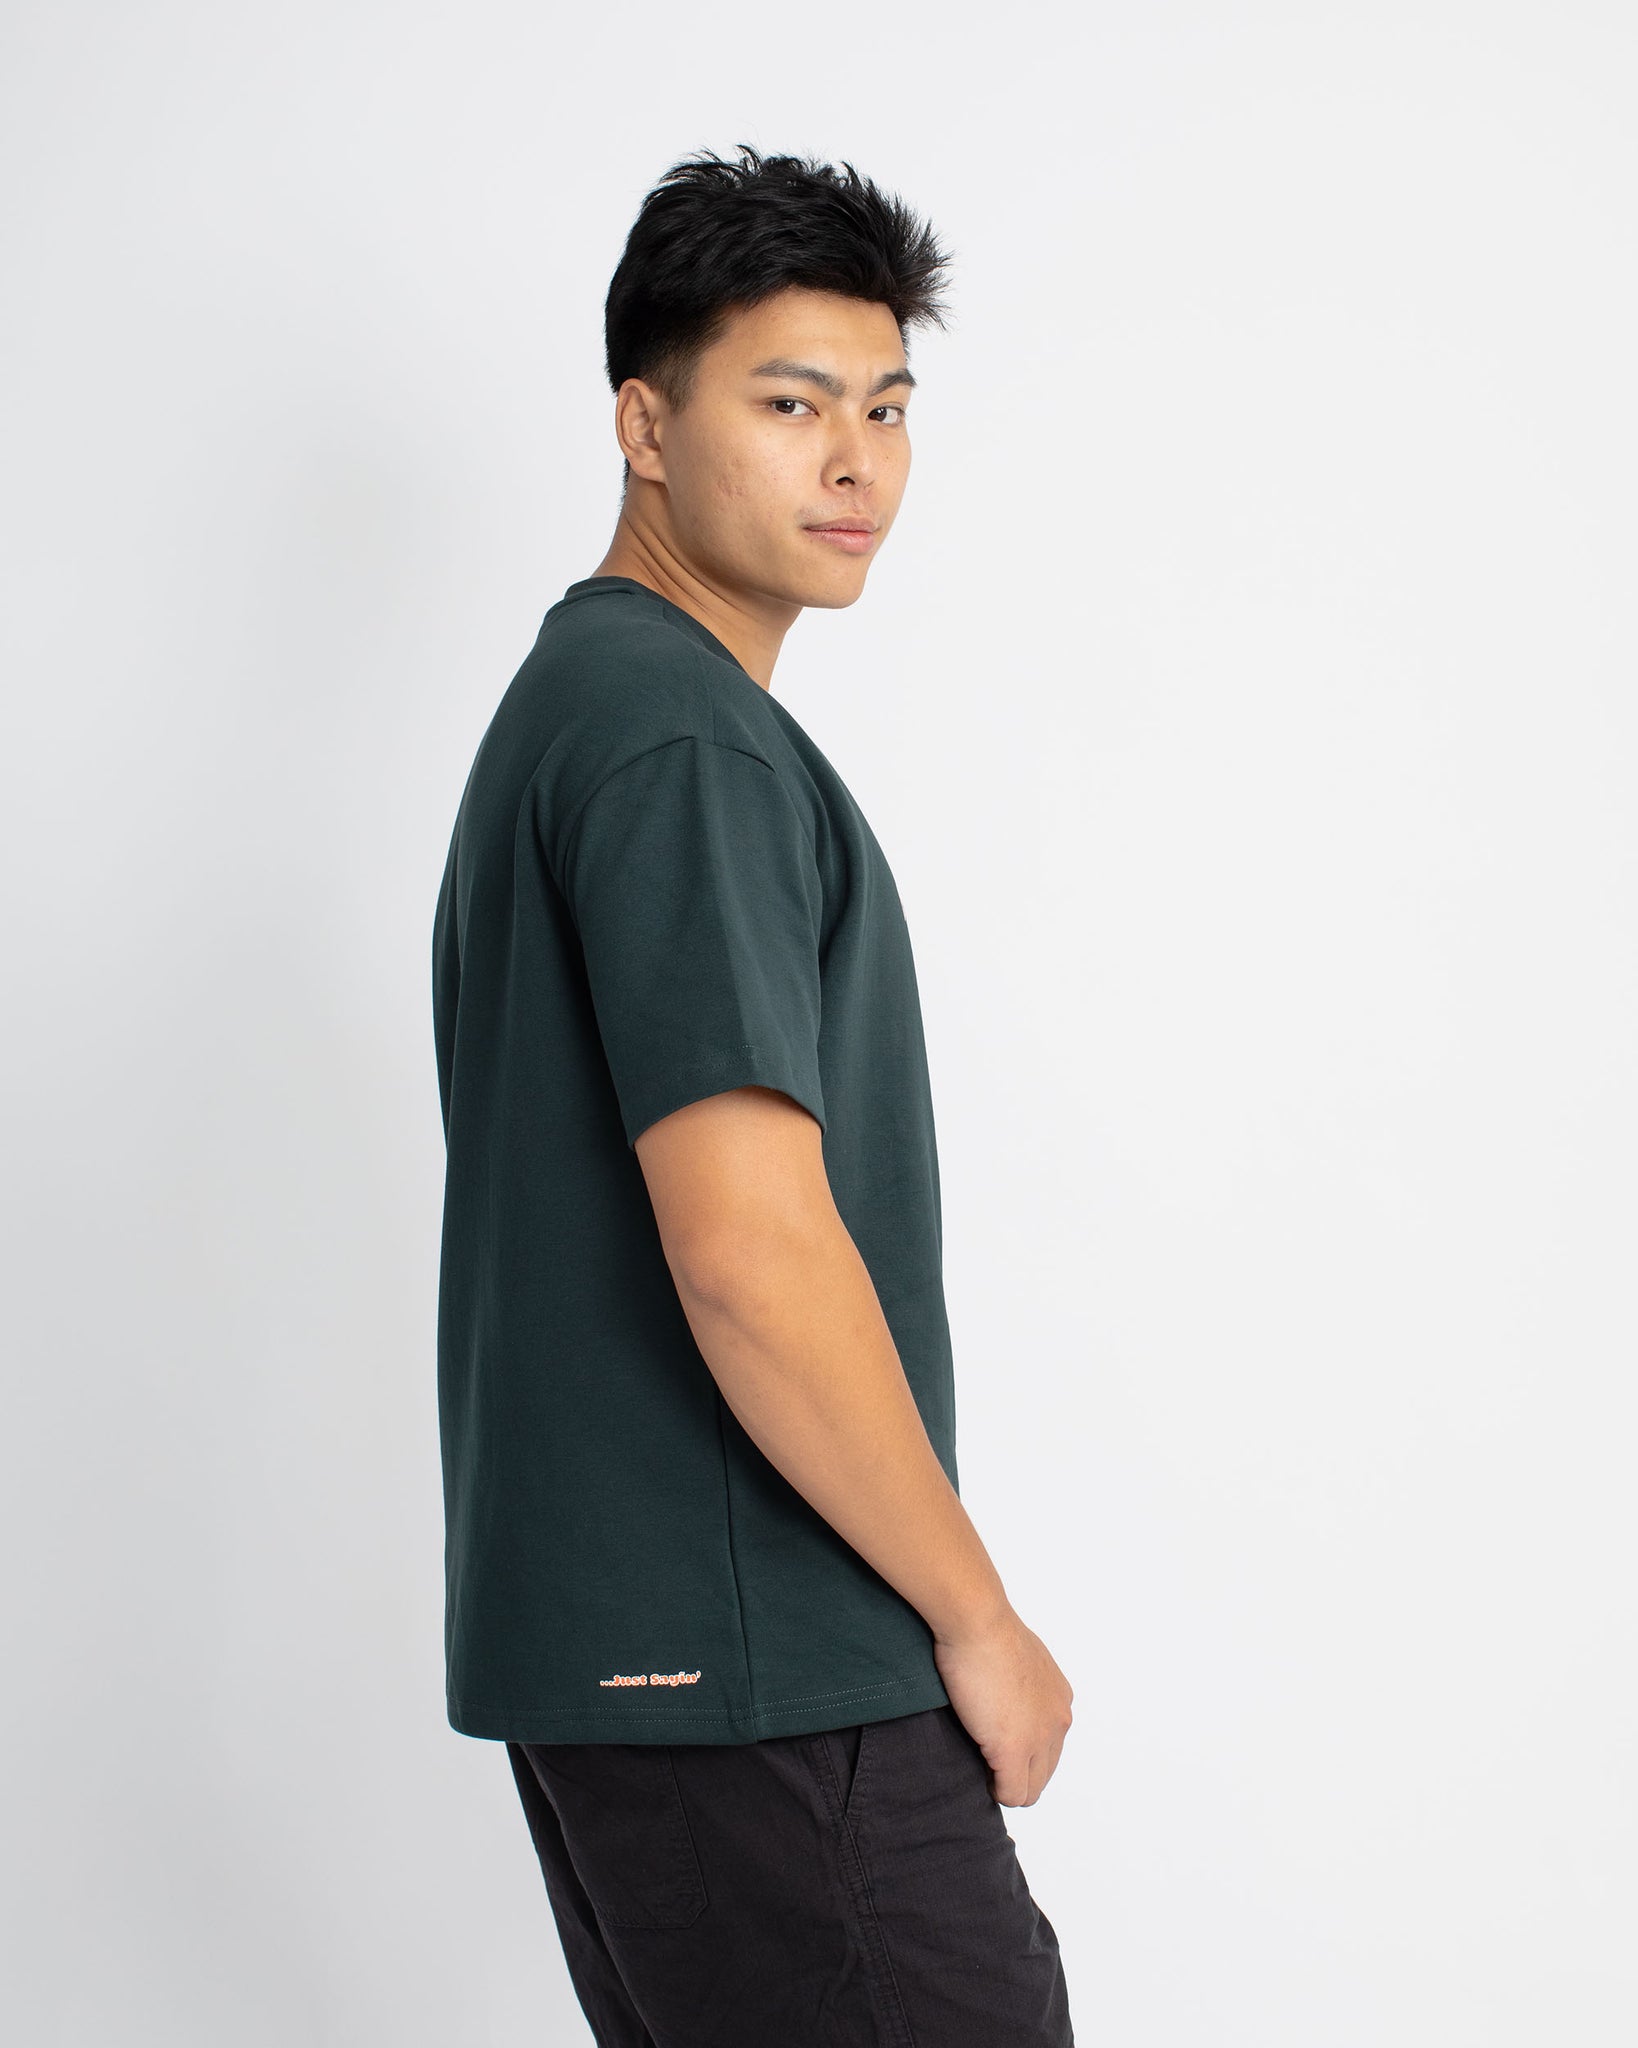 Play Without Limits Tic Tac Toe Tee - Forest Green